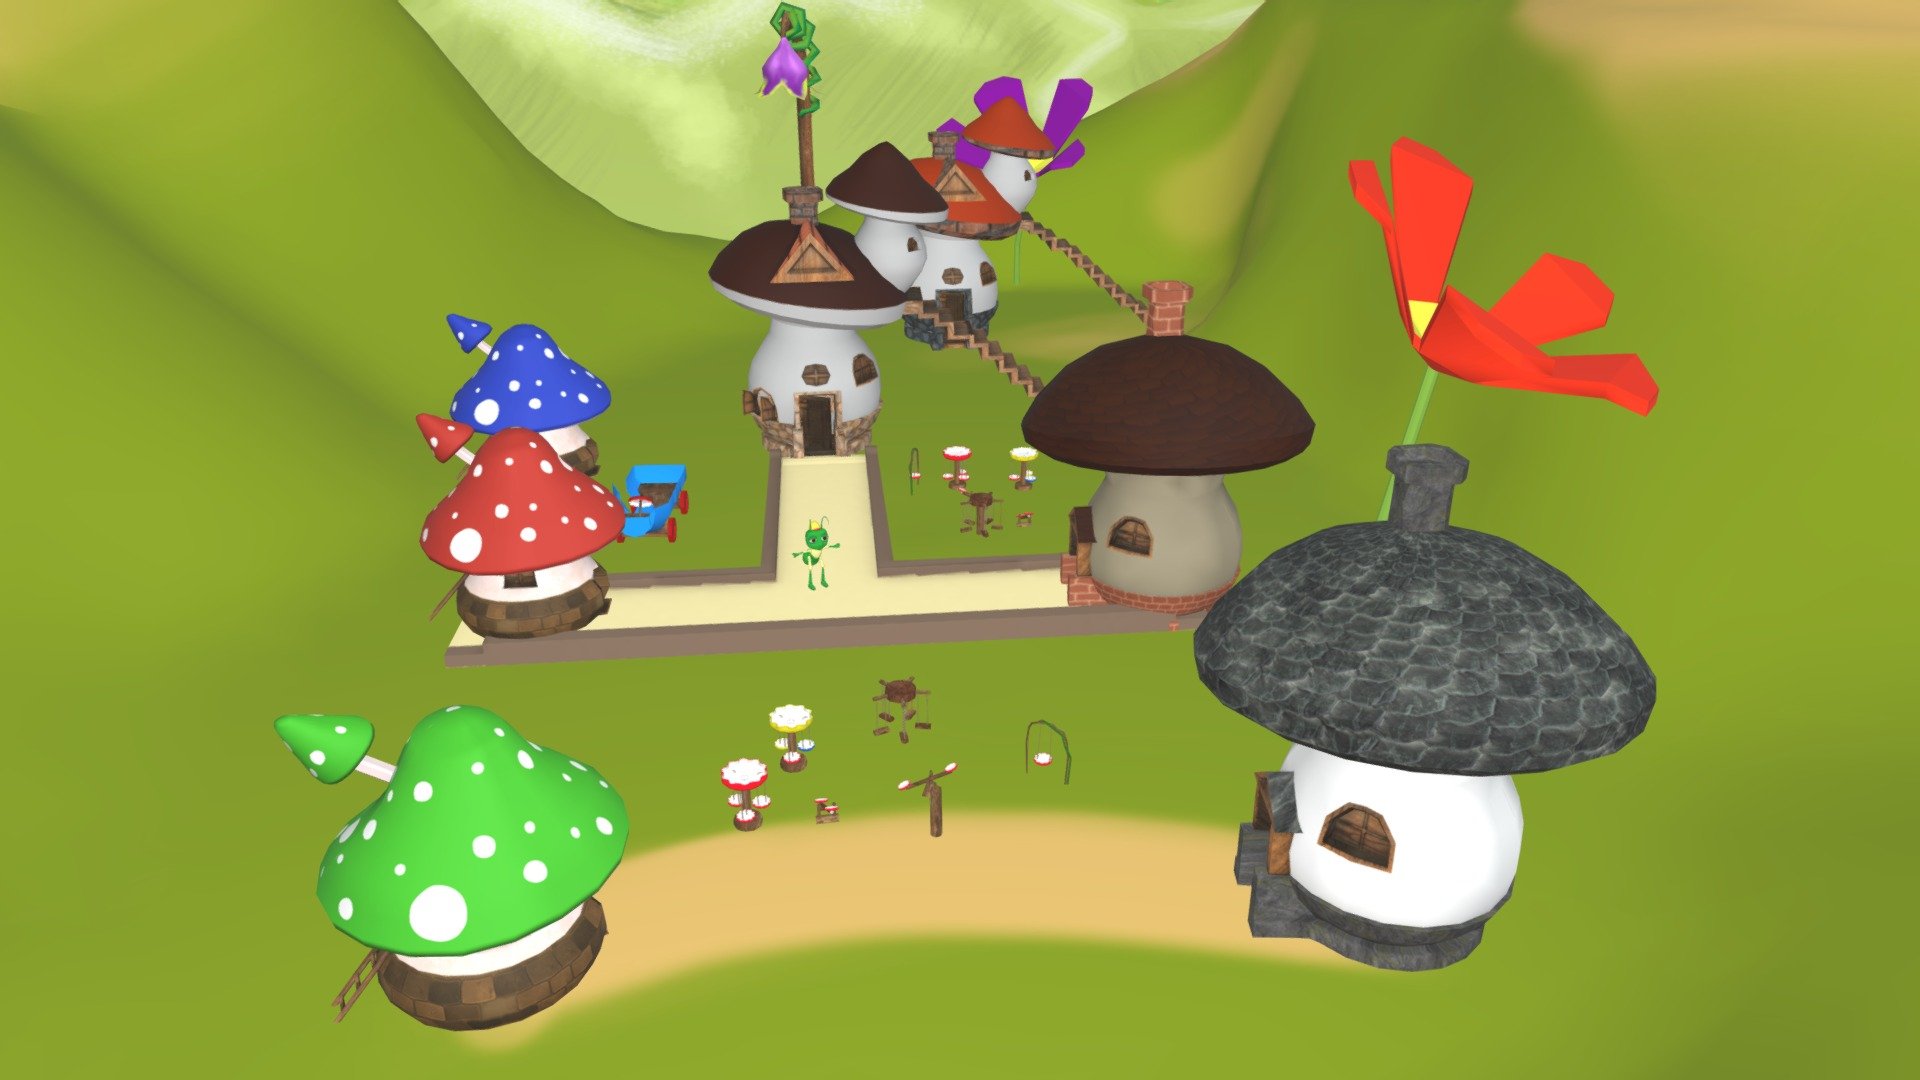 Lowpoly 3D Mushroom Houses for your next game or animation project.
Includes one rigged free character of Green Ant.

Looking for a 3D Mushroom Houses that is both lowpoly and creative? Look no further than the Bugs Mushroom Lowpoly City 3D Art Middle Pack! This package includes one rigged free character of a green ant, making it perfect for any video game or animation project. 

The mushrooms are perfect for any type of city scene, whether you're creating a whimsical wonderland or a bustling metropolis. The possibilities are endless with this set. So what are you waiting for? Get your hands on the Bugs Mushroom Lowpoly City 3D Art Middle Pack today!

We look forward to your feedback so we can create more assets for YOU! - Bugs City: Stylized Mushroom Pack - Buy Royalty Free 3D model by HayqArt 3d model